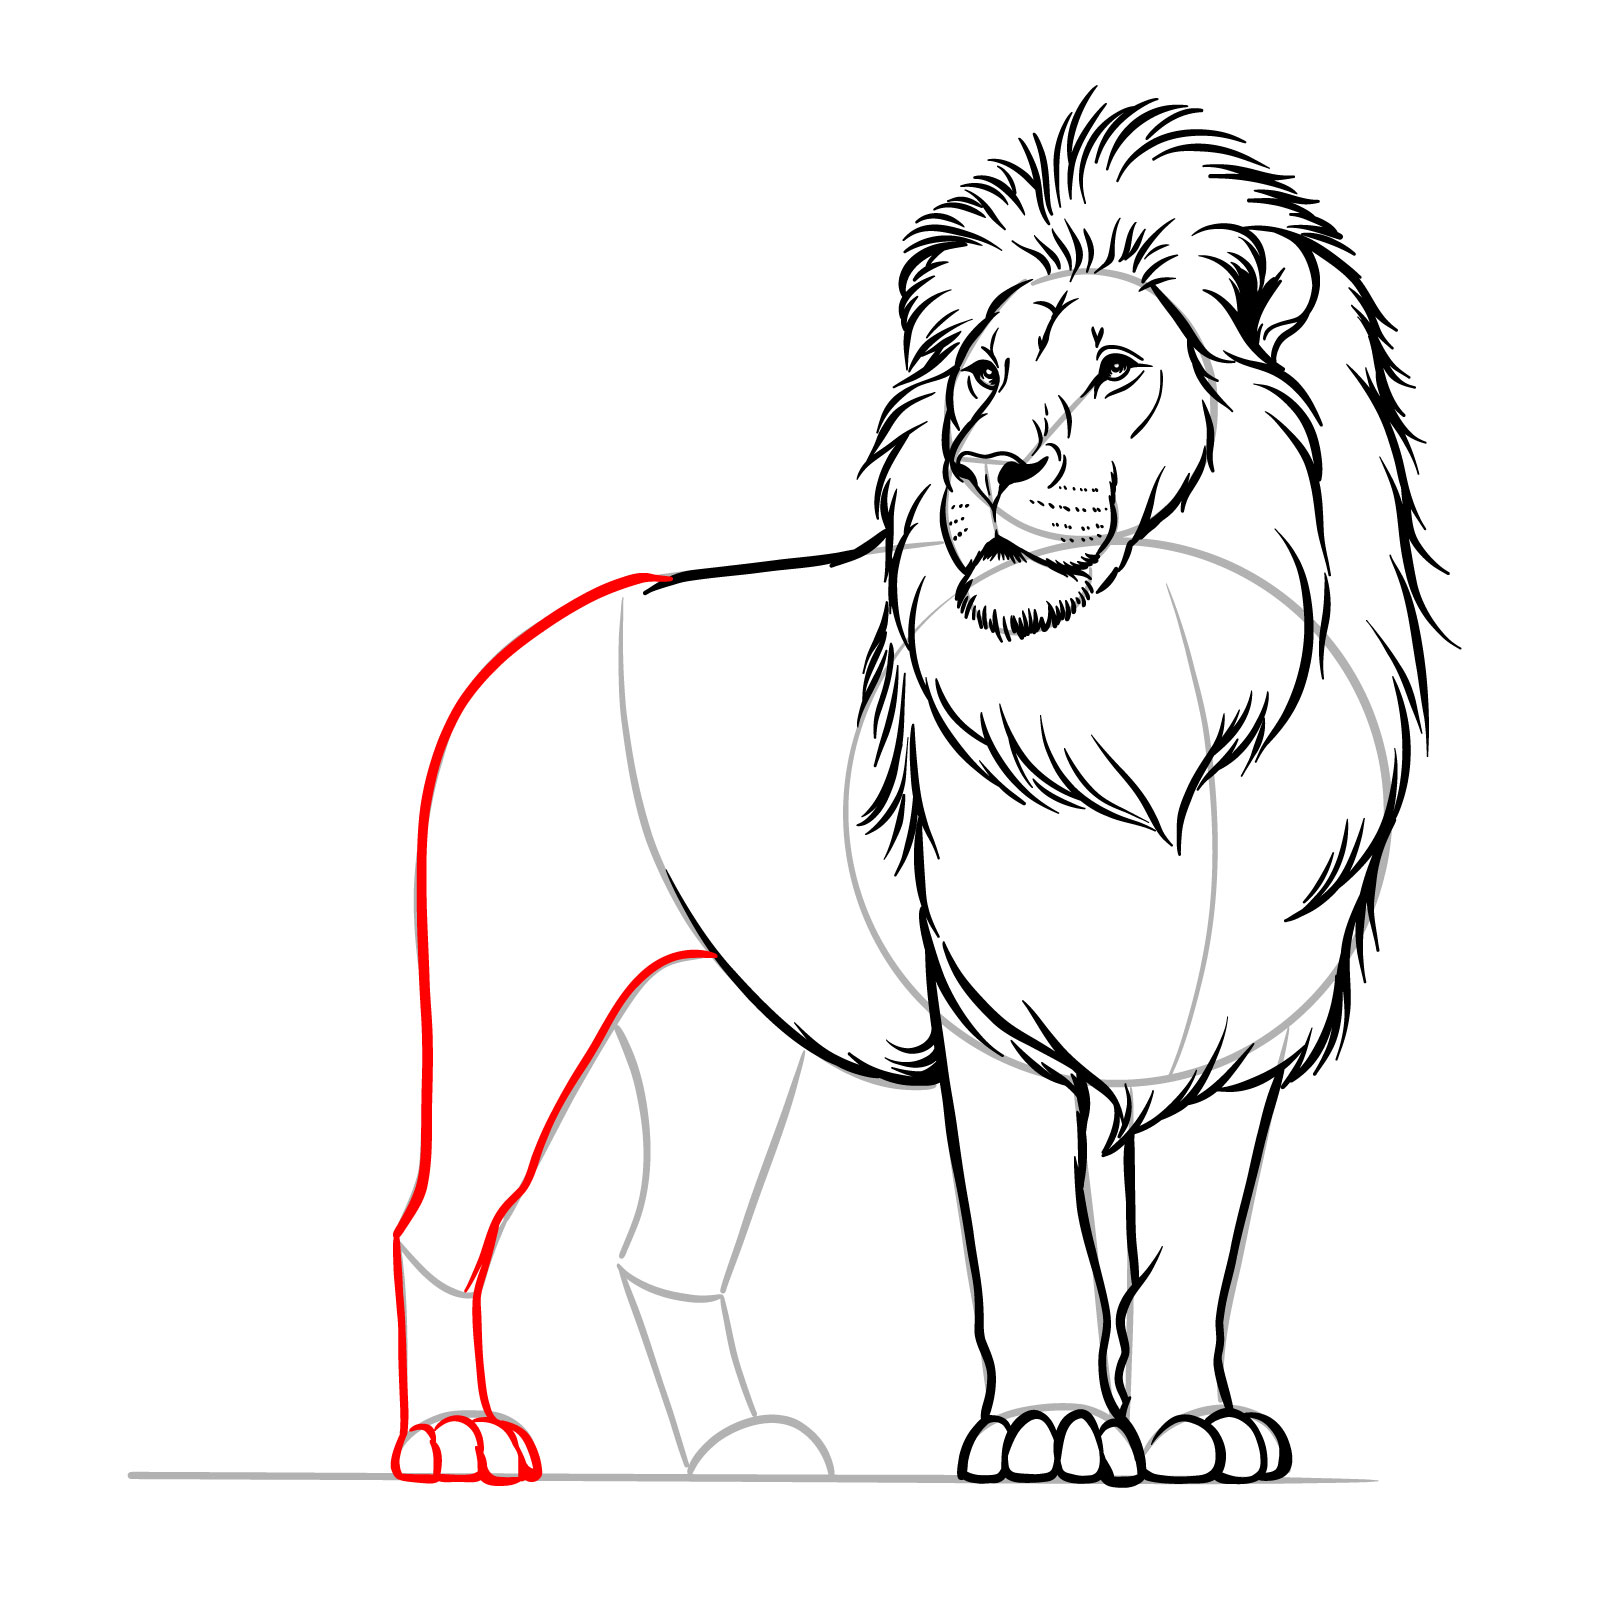 Finishing the body outline and adding the rear leg in a how to draw a standing lion guide - step 12